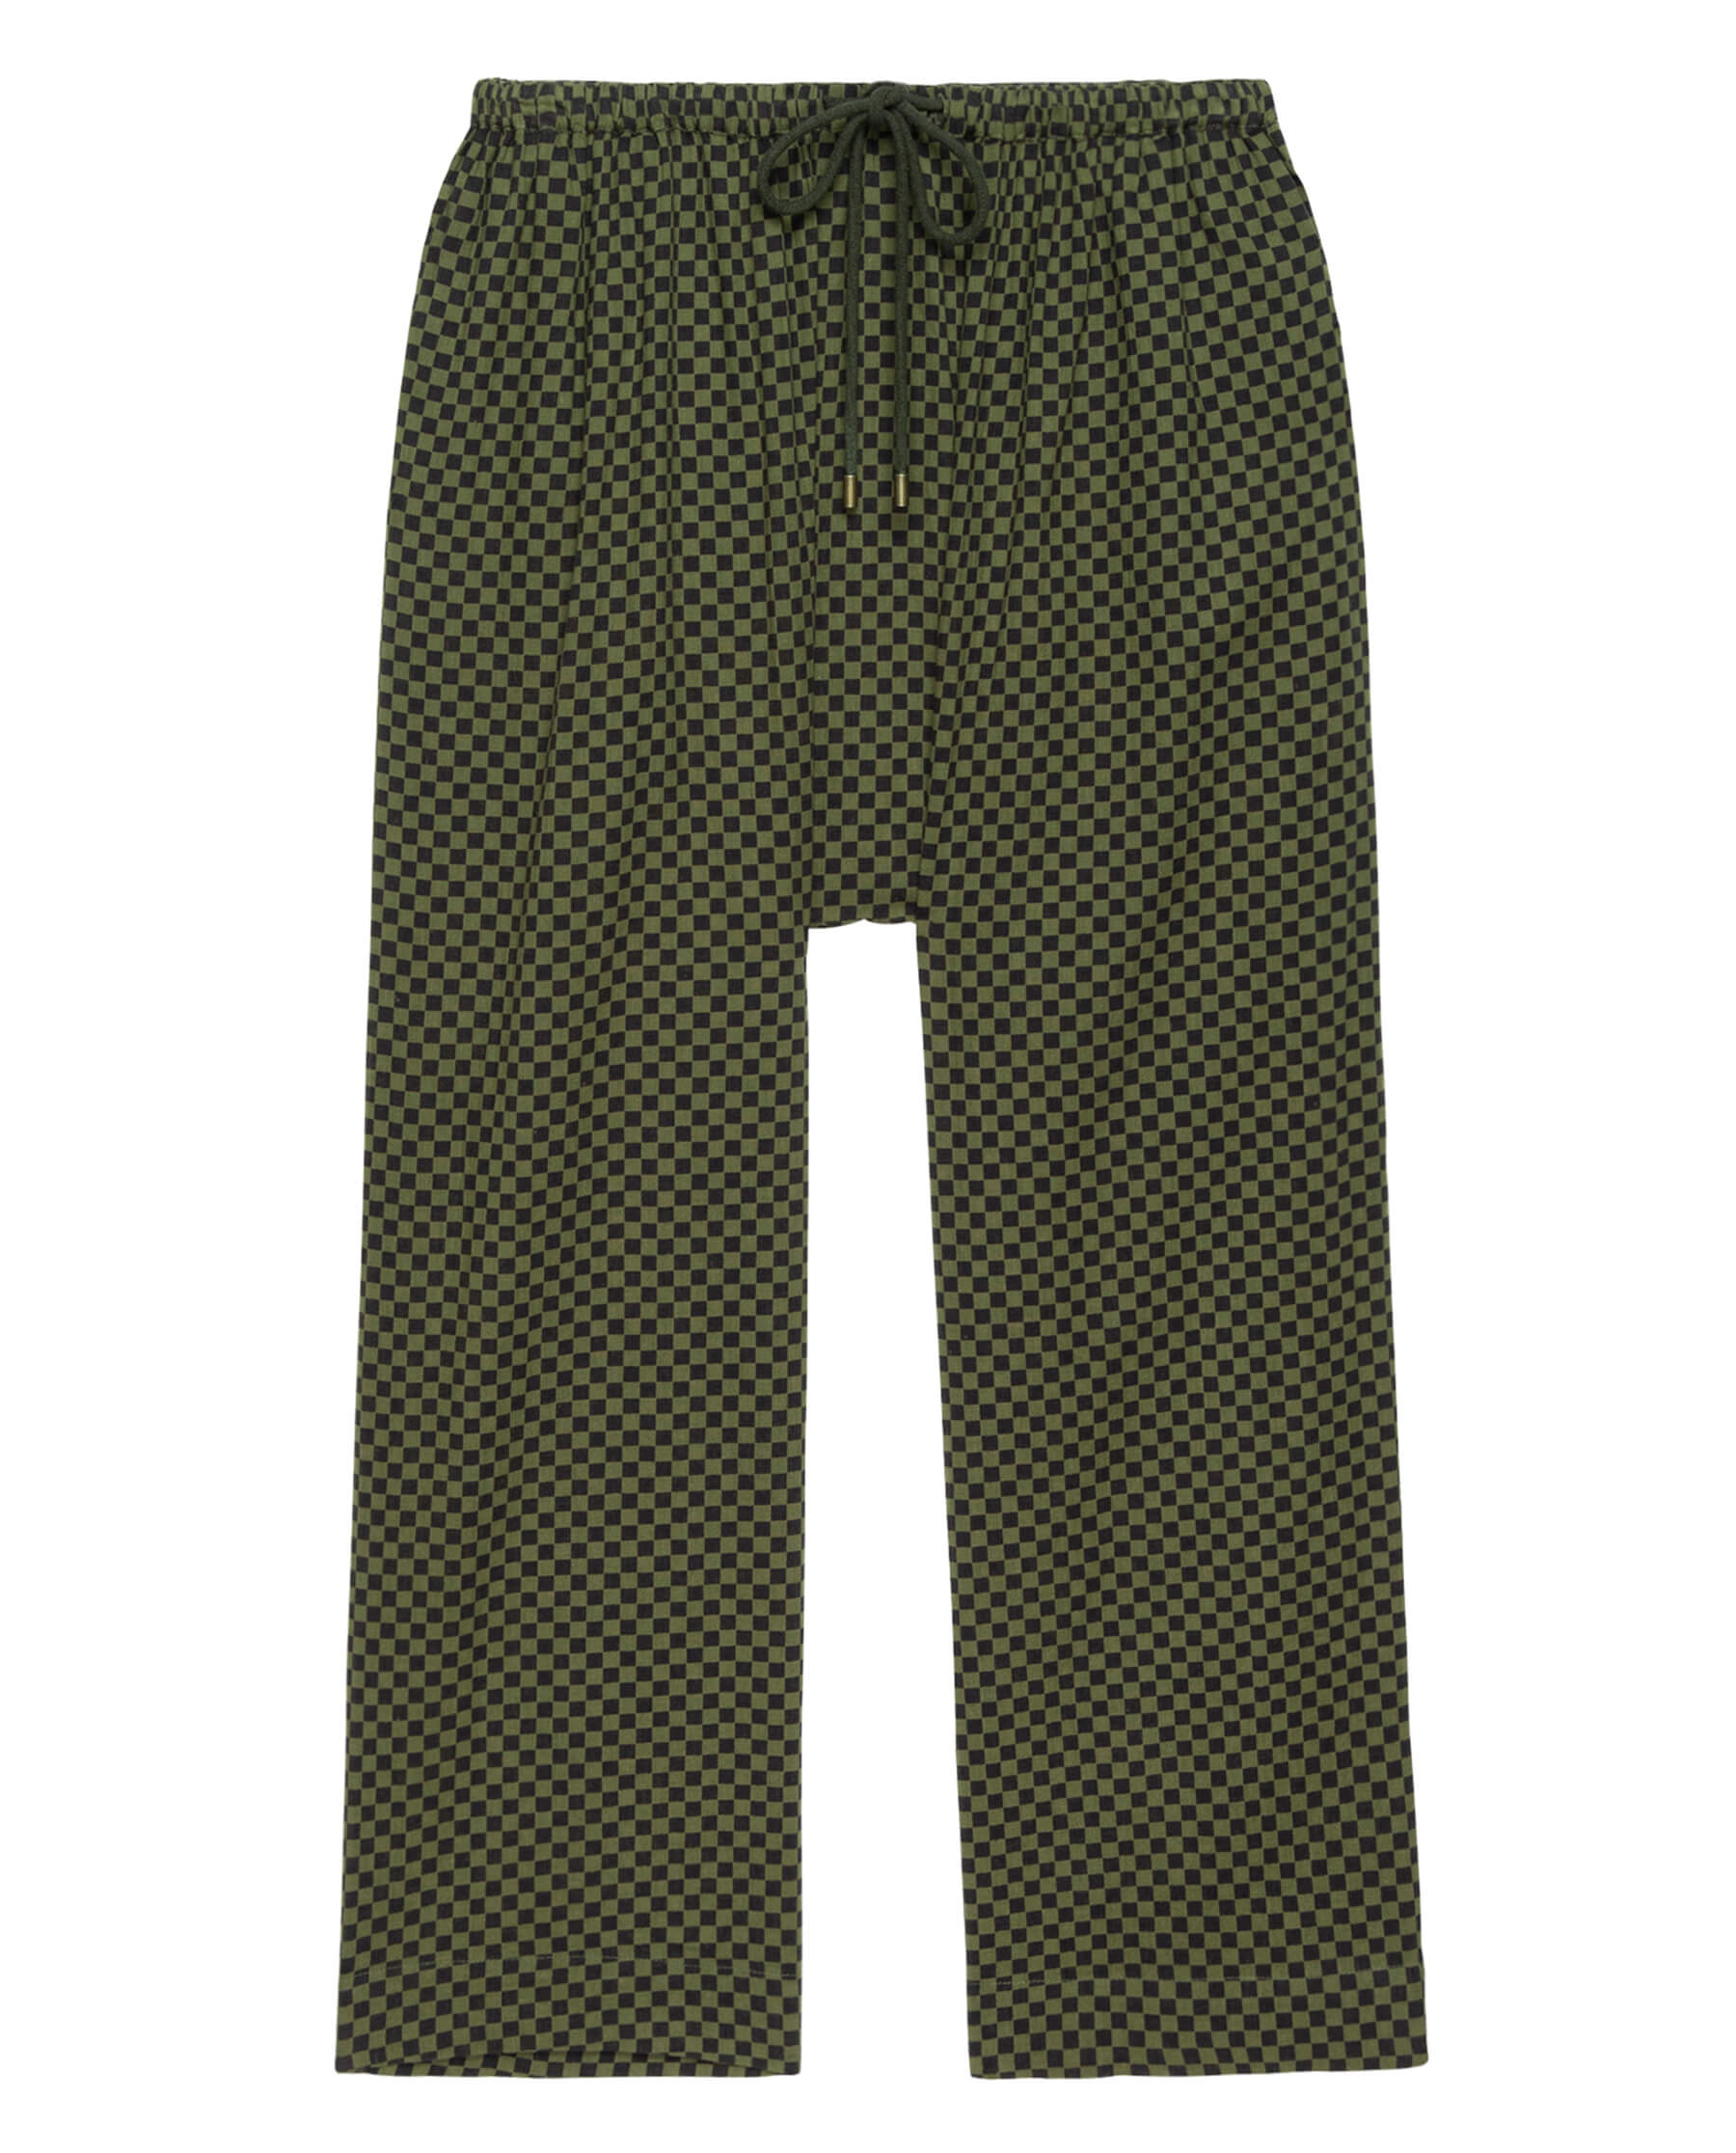 The Reef Pant. -- Dark Army Check COVER-UP PANTS THE GREAT. SP24 SWIM